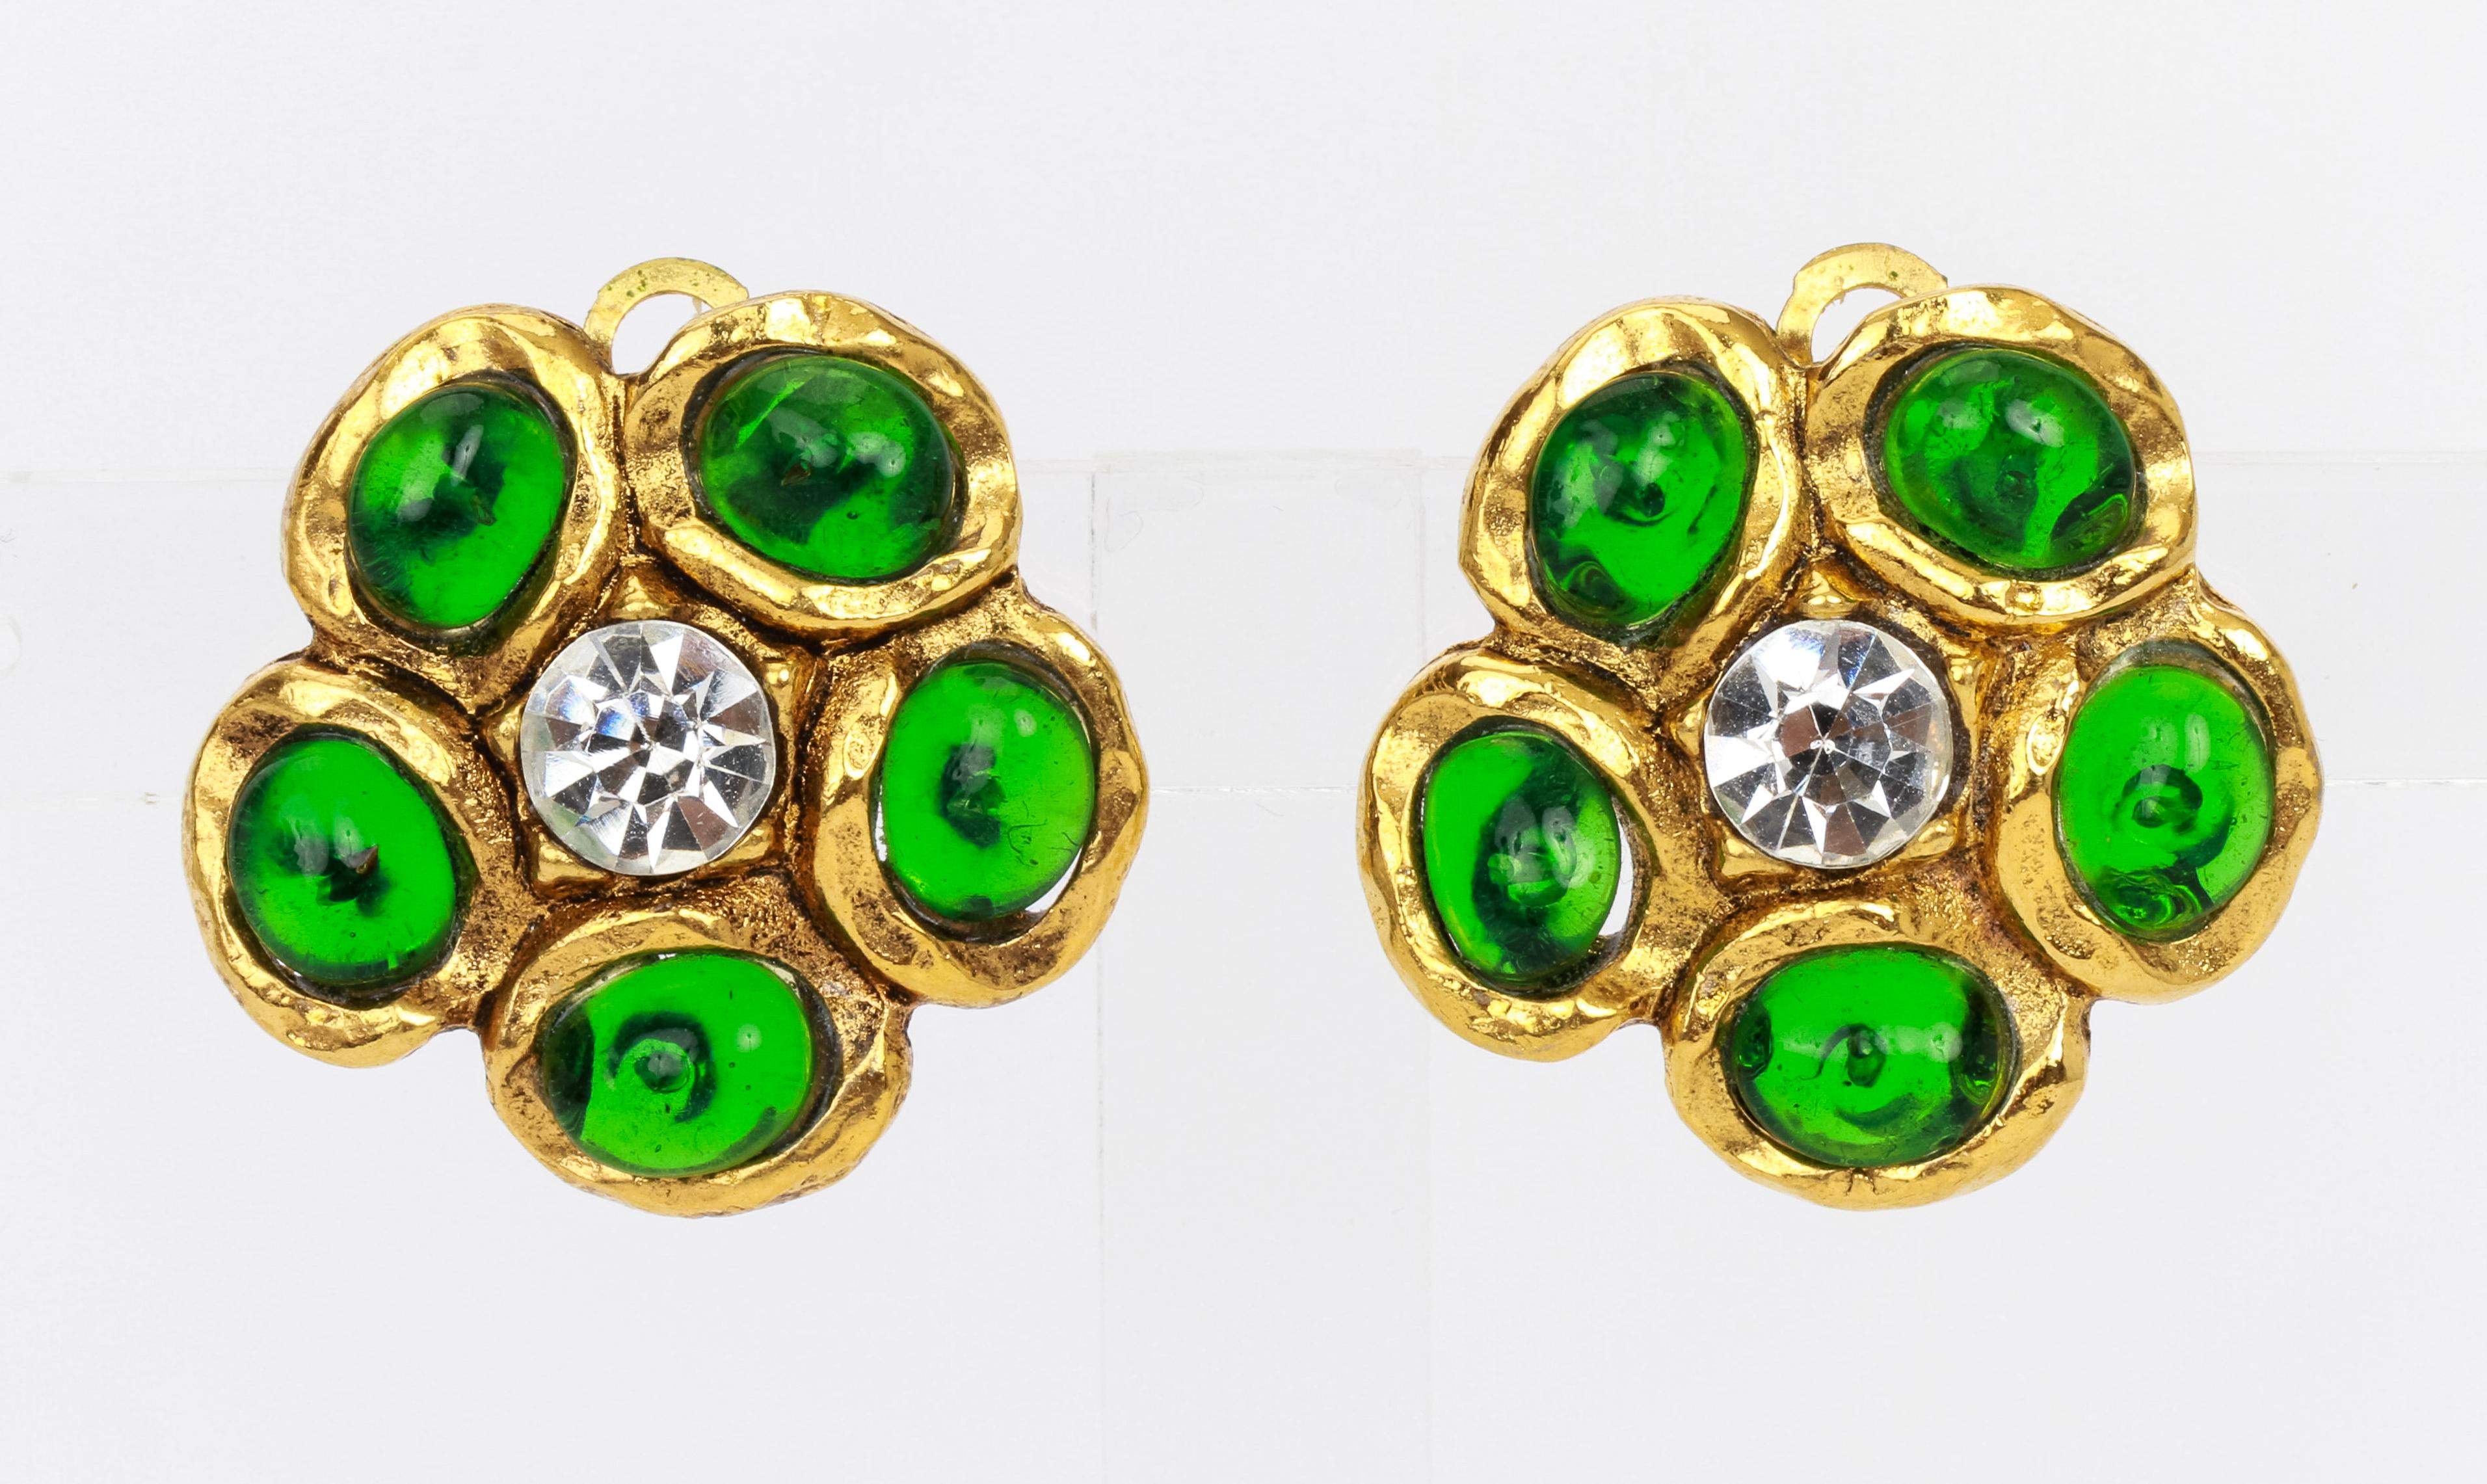 Chanel 70s flower earrings set in gold metal with 2 brilliant cut rhinestones at the center and five petals each featuring green cabochons gripoix